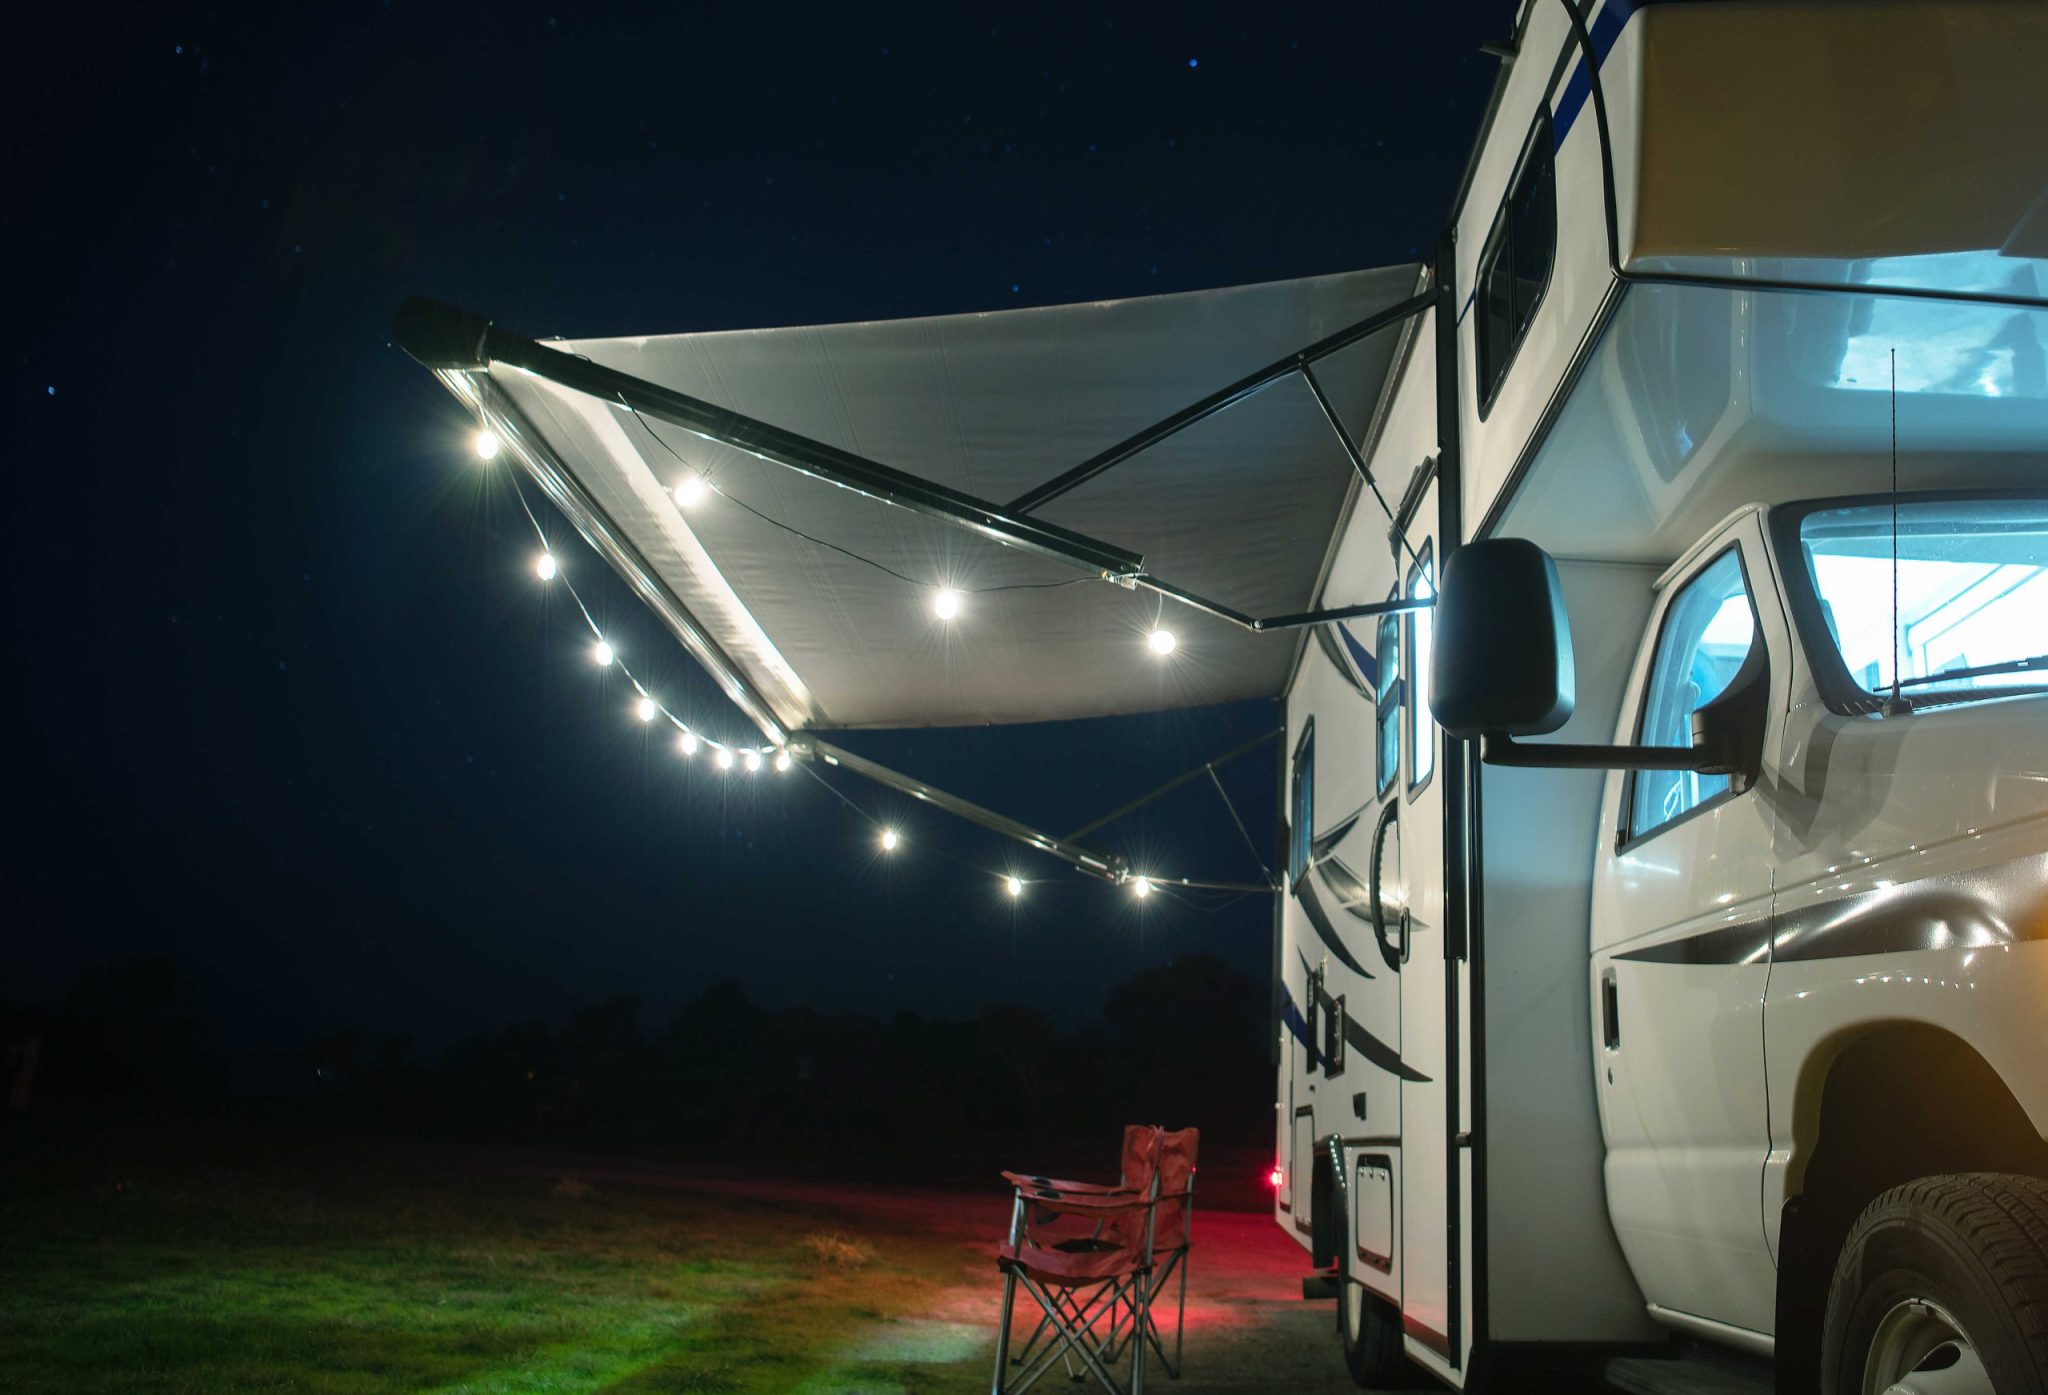 Accomondation class c motorhome rv with string lights on the cam 2022 10 26 03 46 46 utc optimized scaled